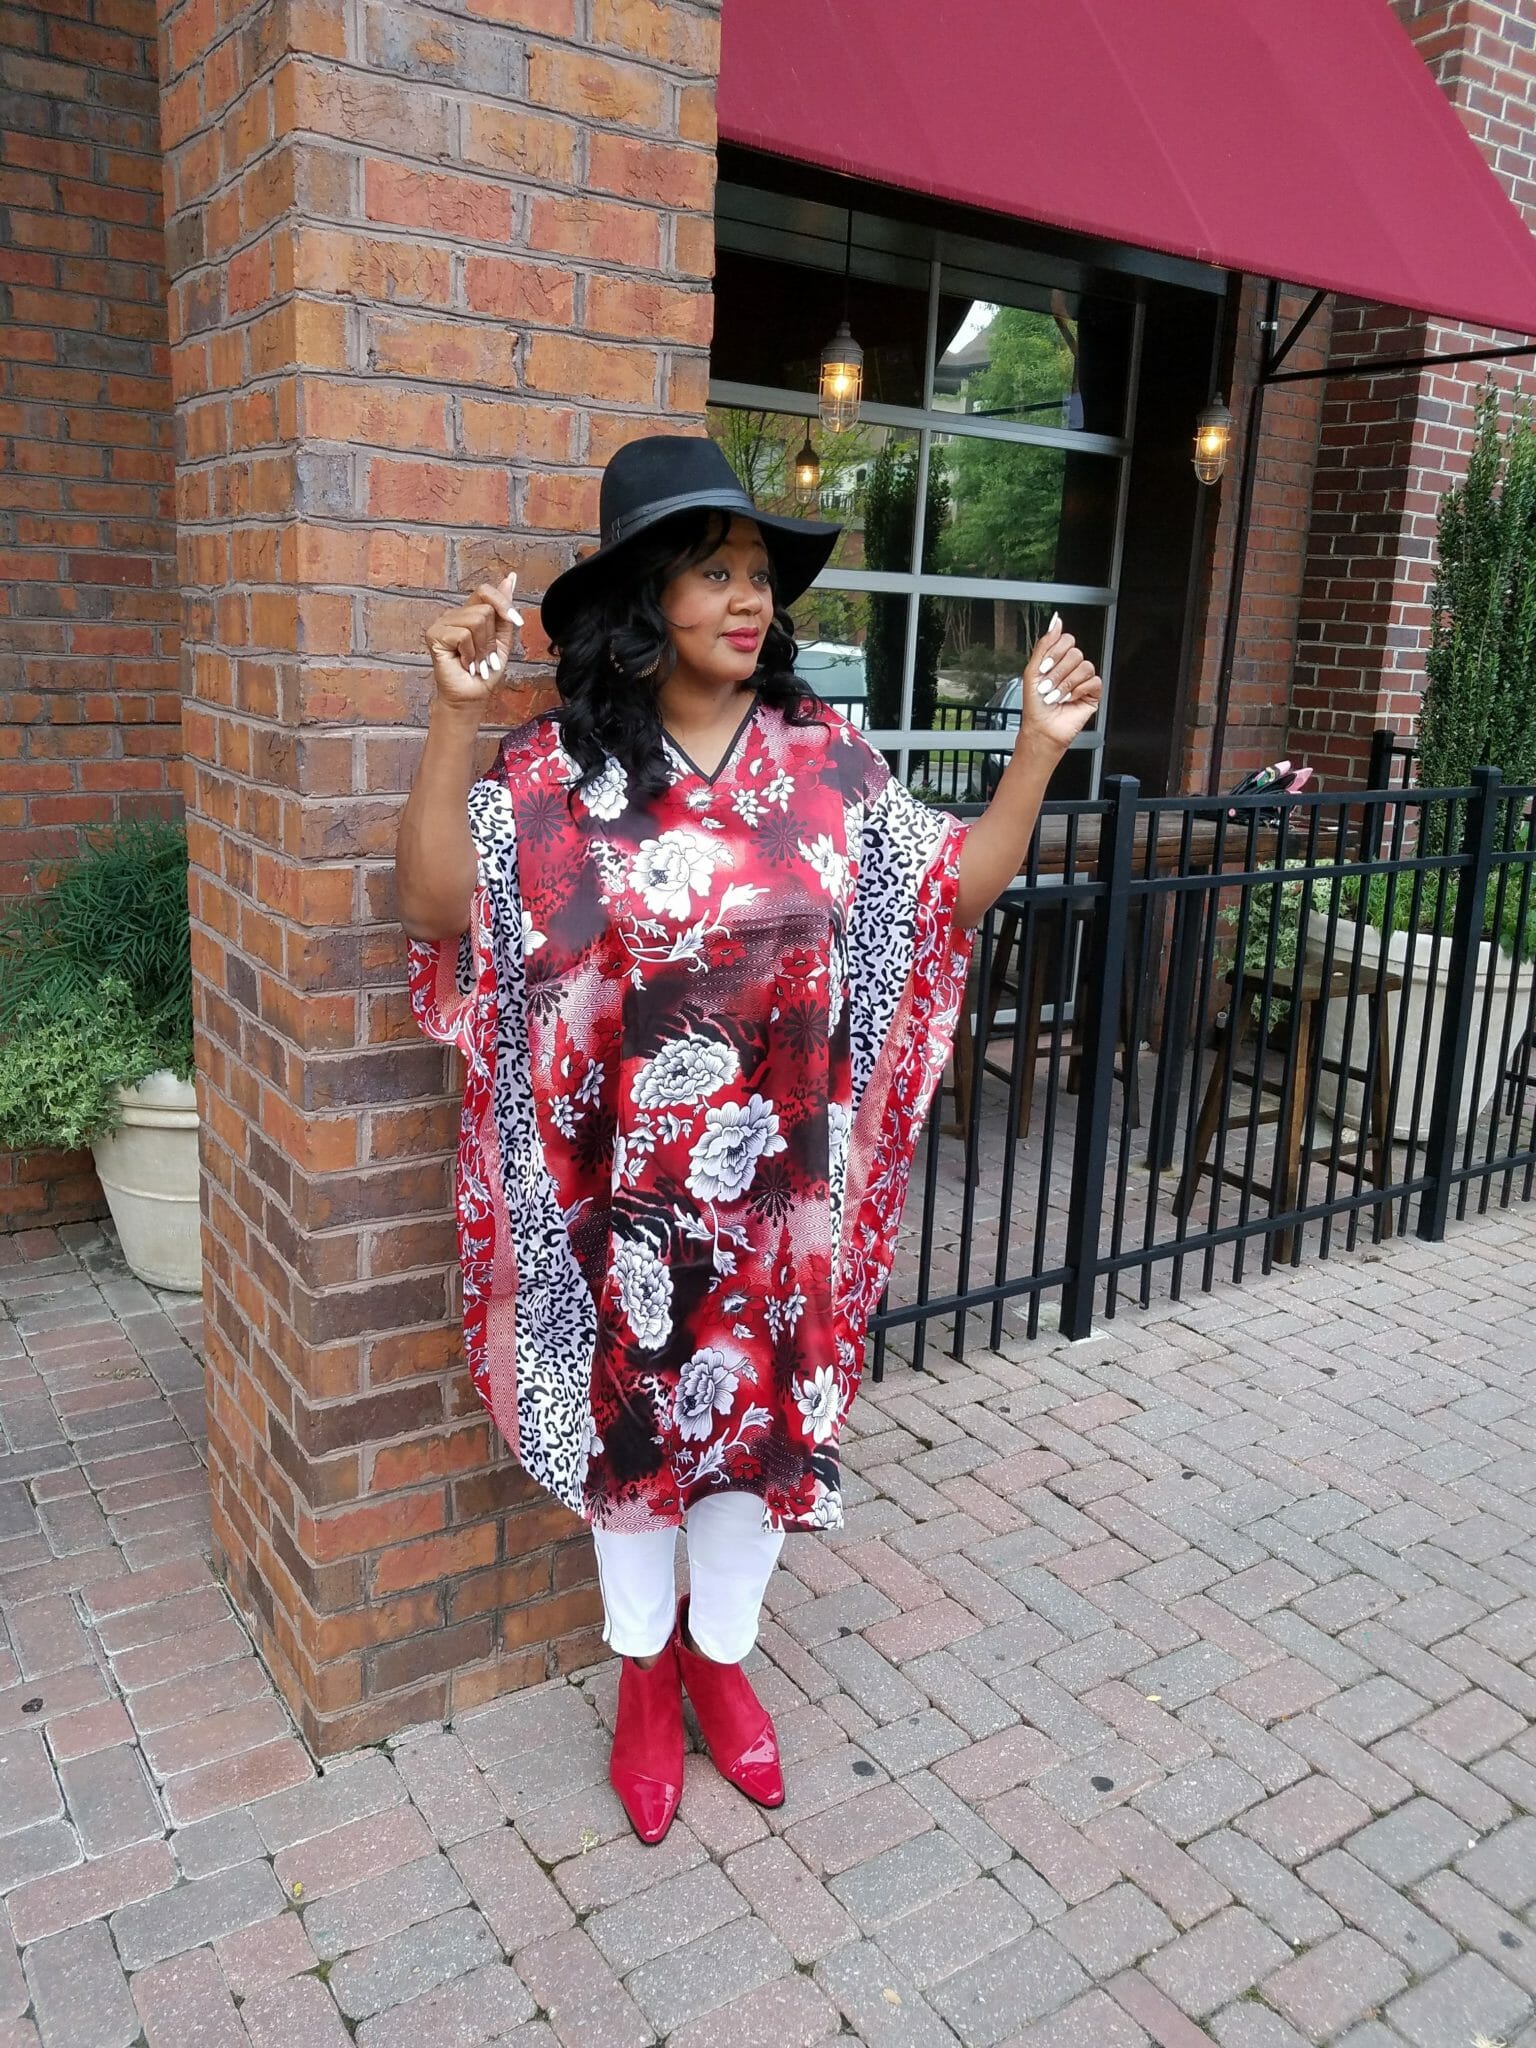 A black woman with arms up, wearing a black cowboy style hat and a red, white and black floral caftan and white pants.